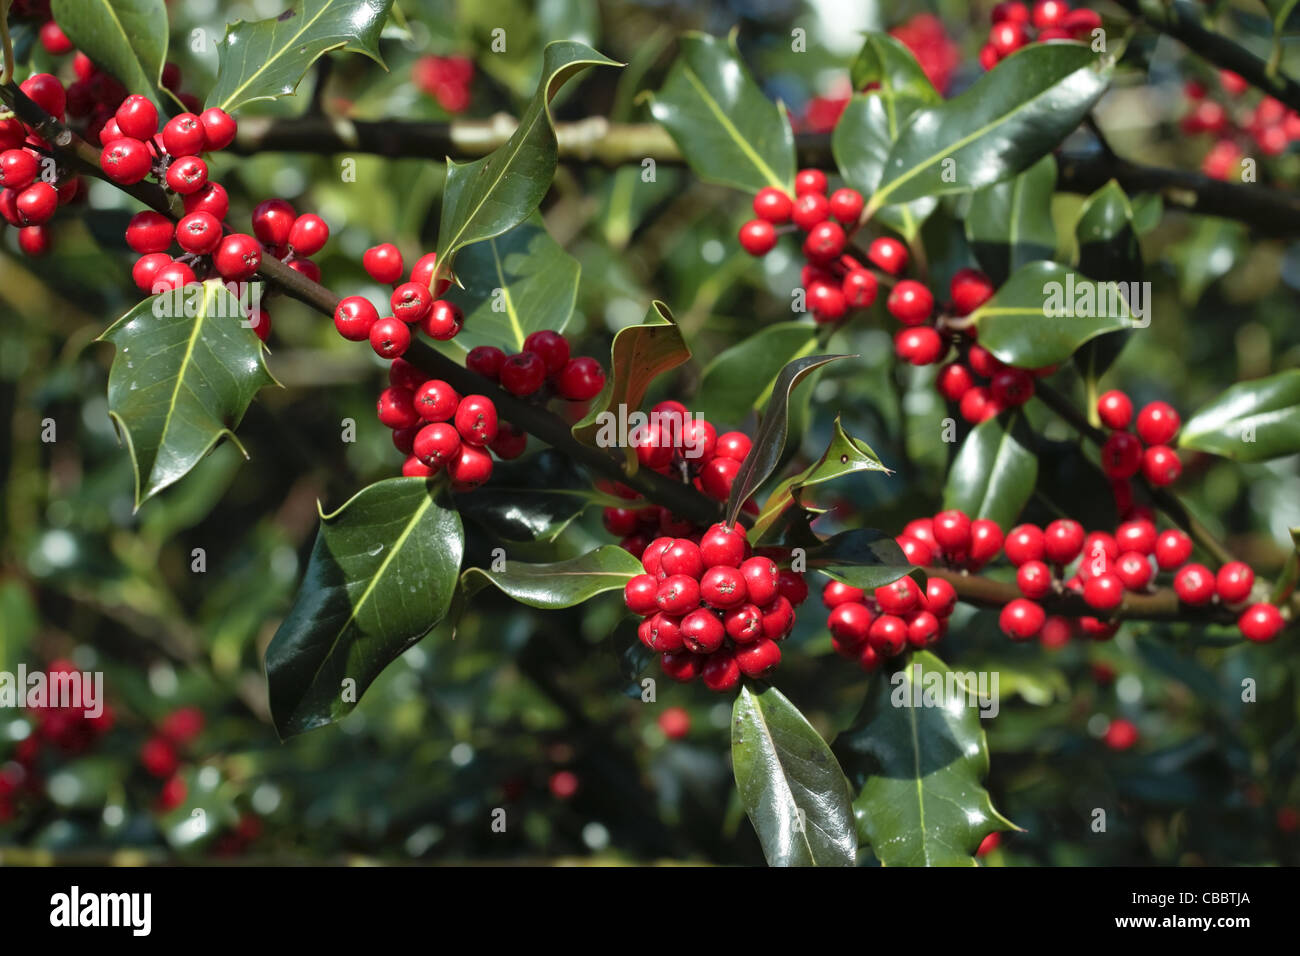 HOlly plant with ripe berries Stock Photo